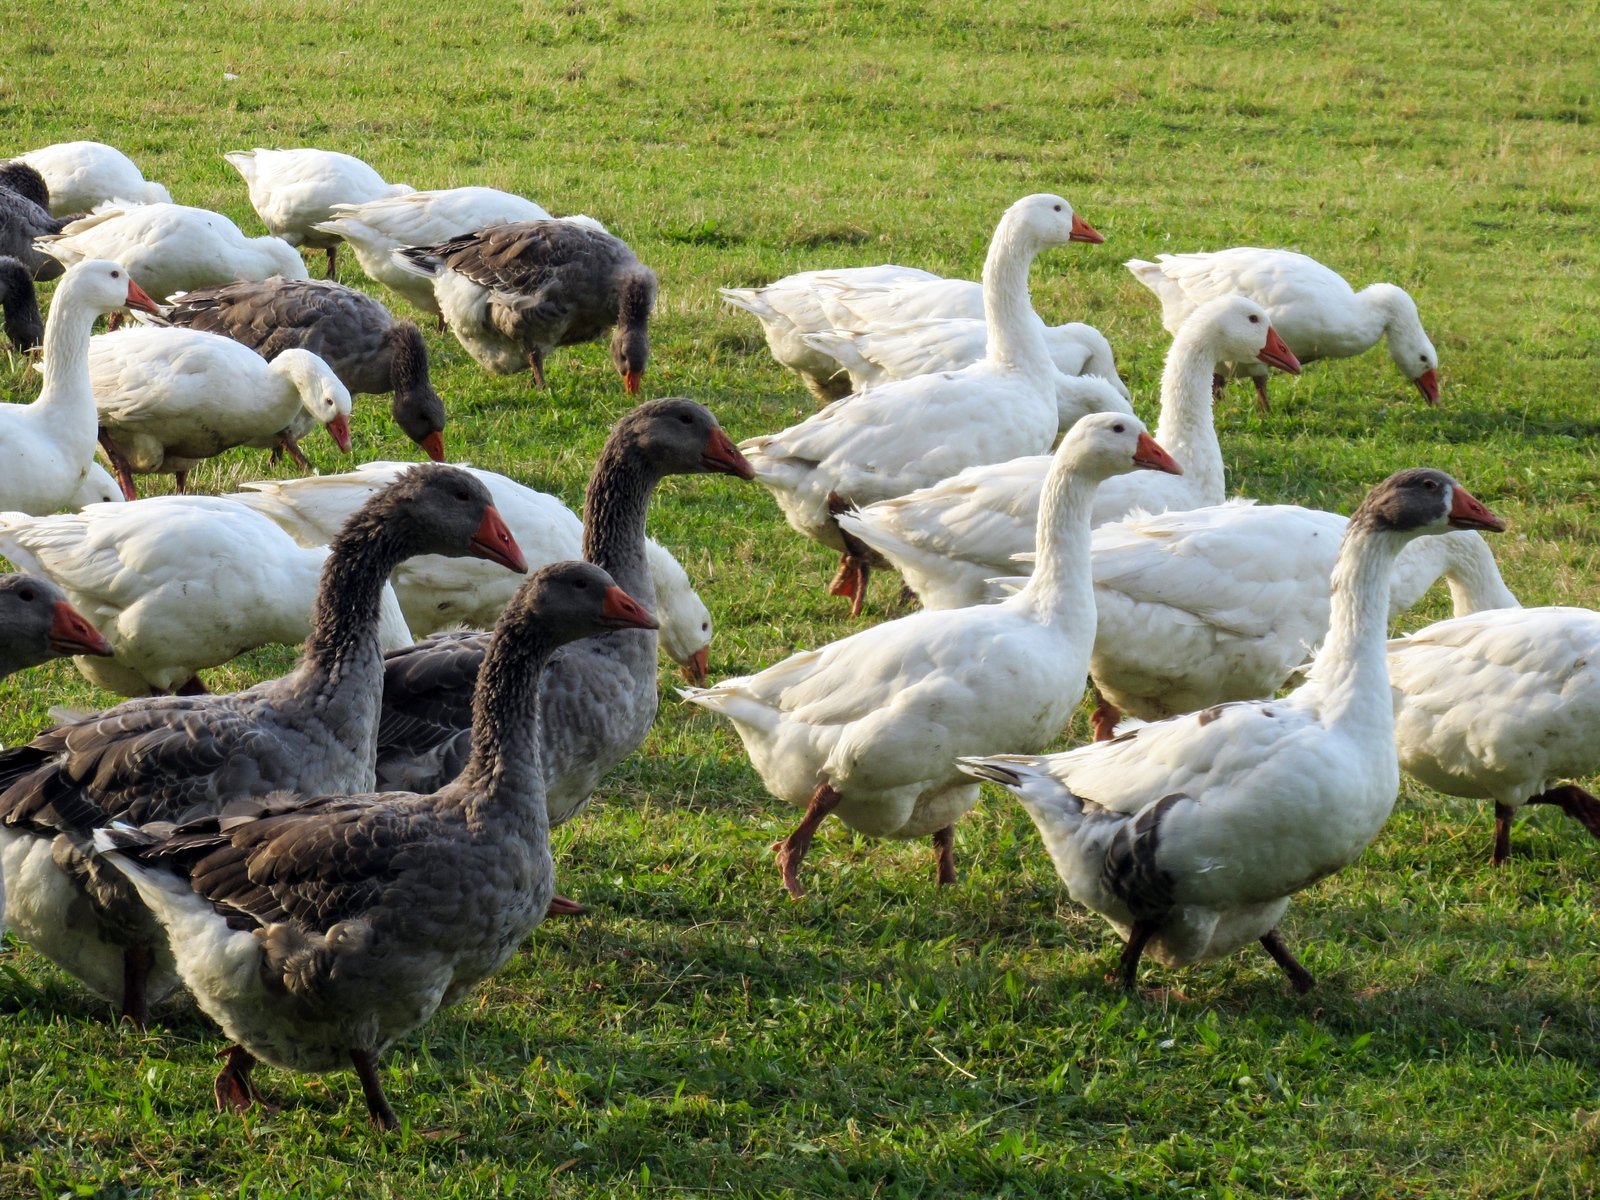 a large flock of ducks is standing in the grass